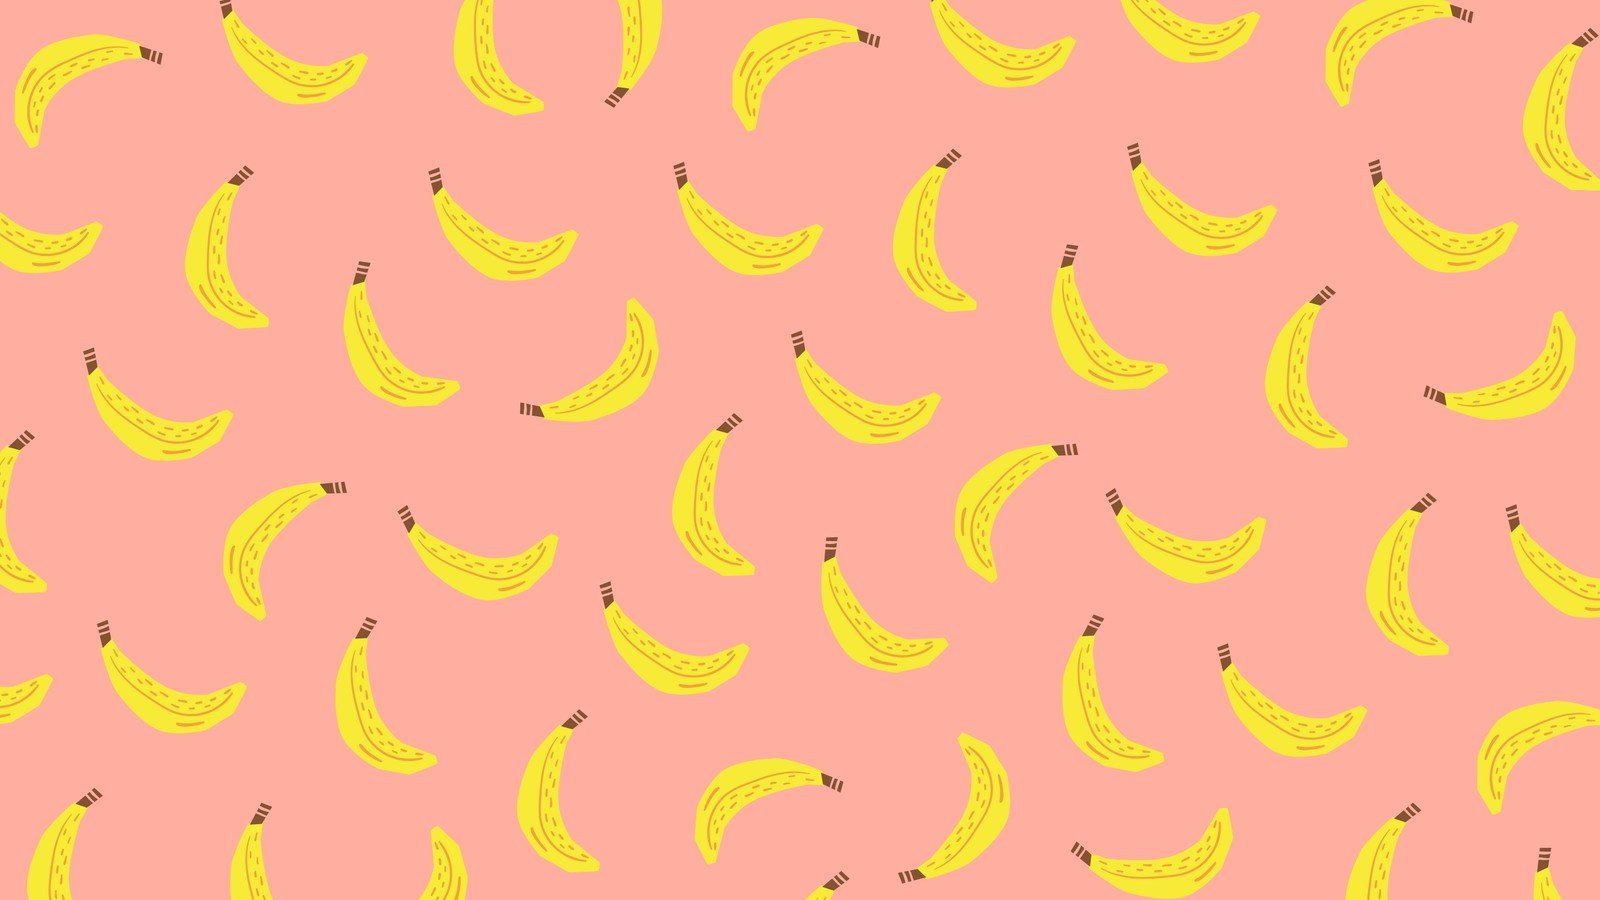 A pattern of yellow bananas on a pink background - Banana